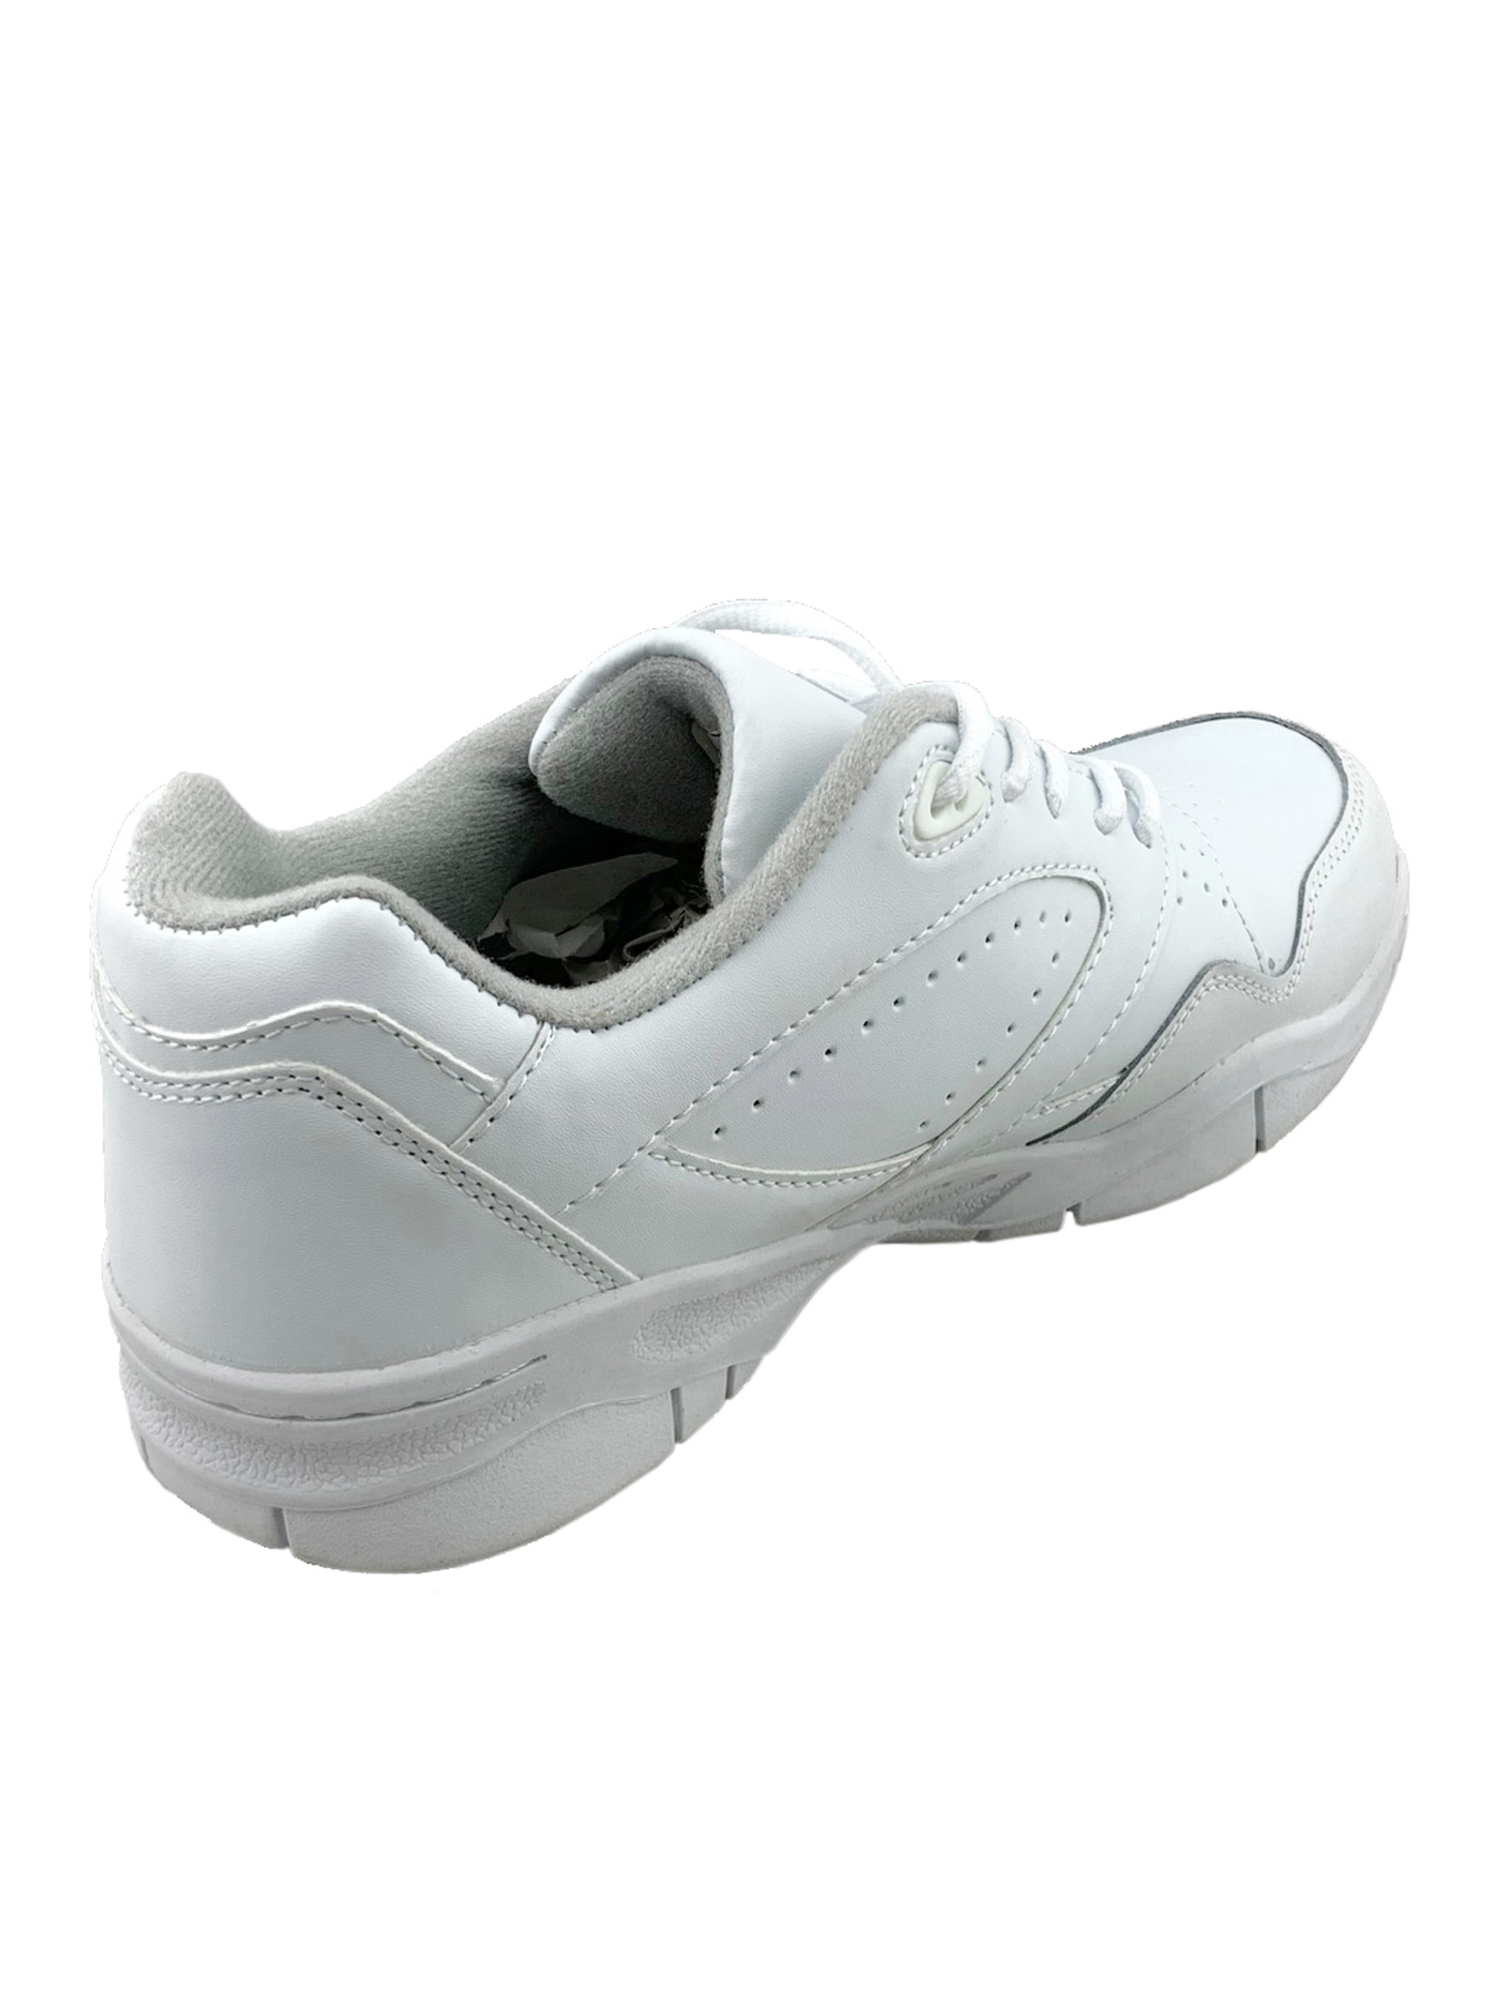 Tanleewa Men's Leather White Sports Shoes Lightweight Sneakers Breathable Casual Shoe Size 3 - image 5 of 5